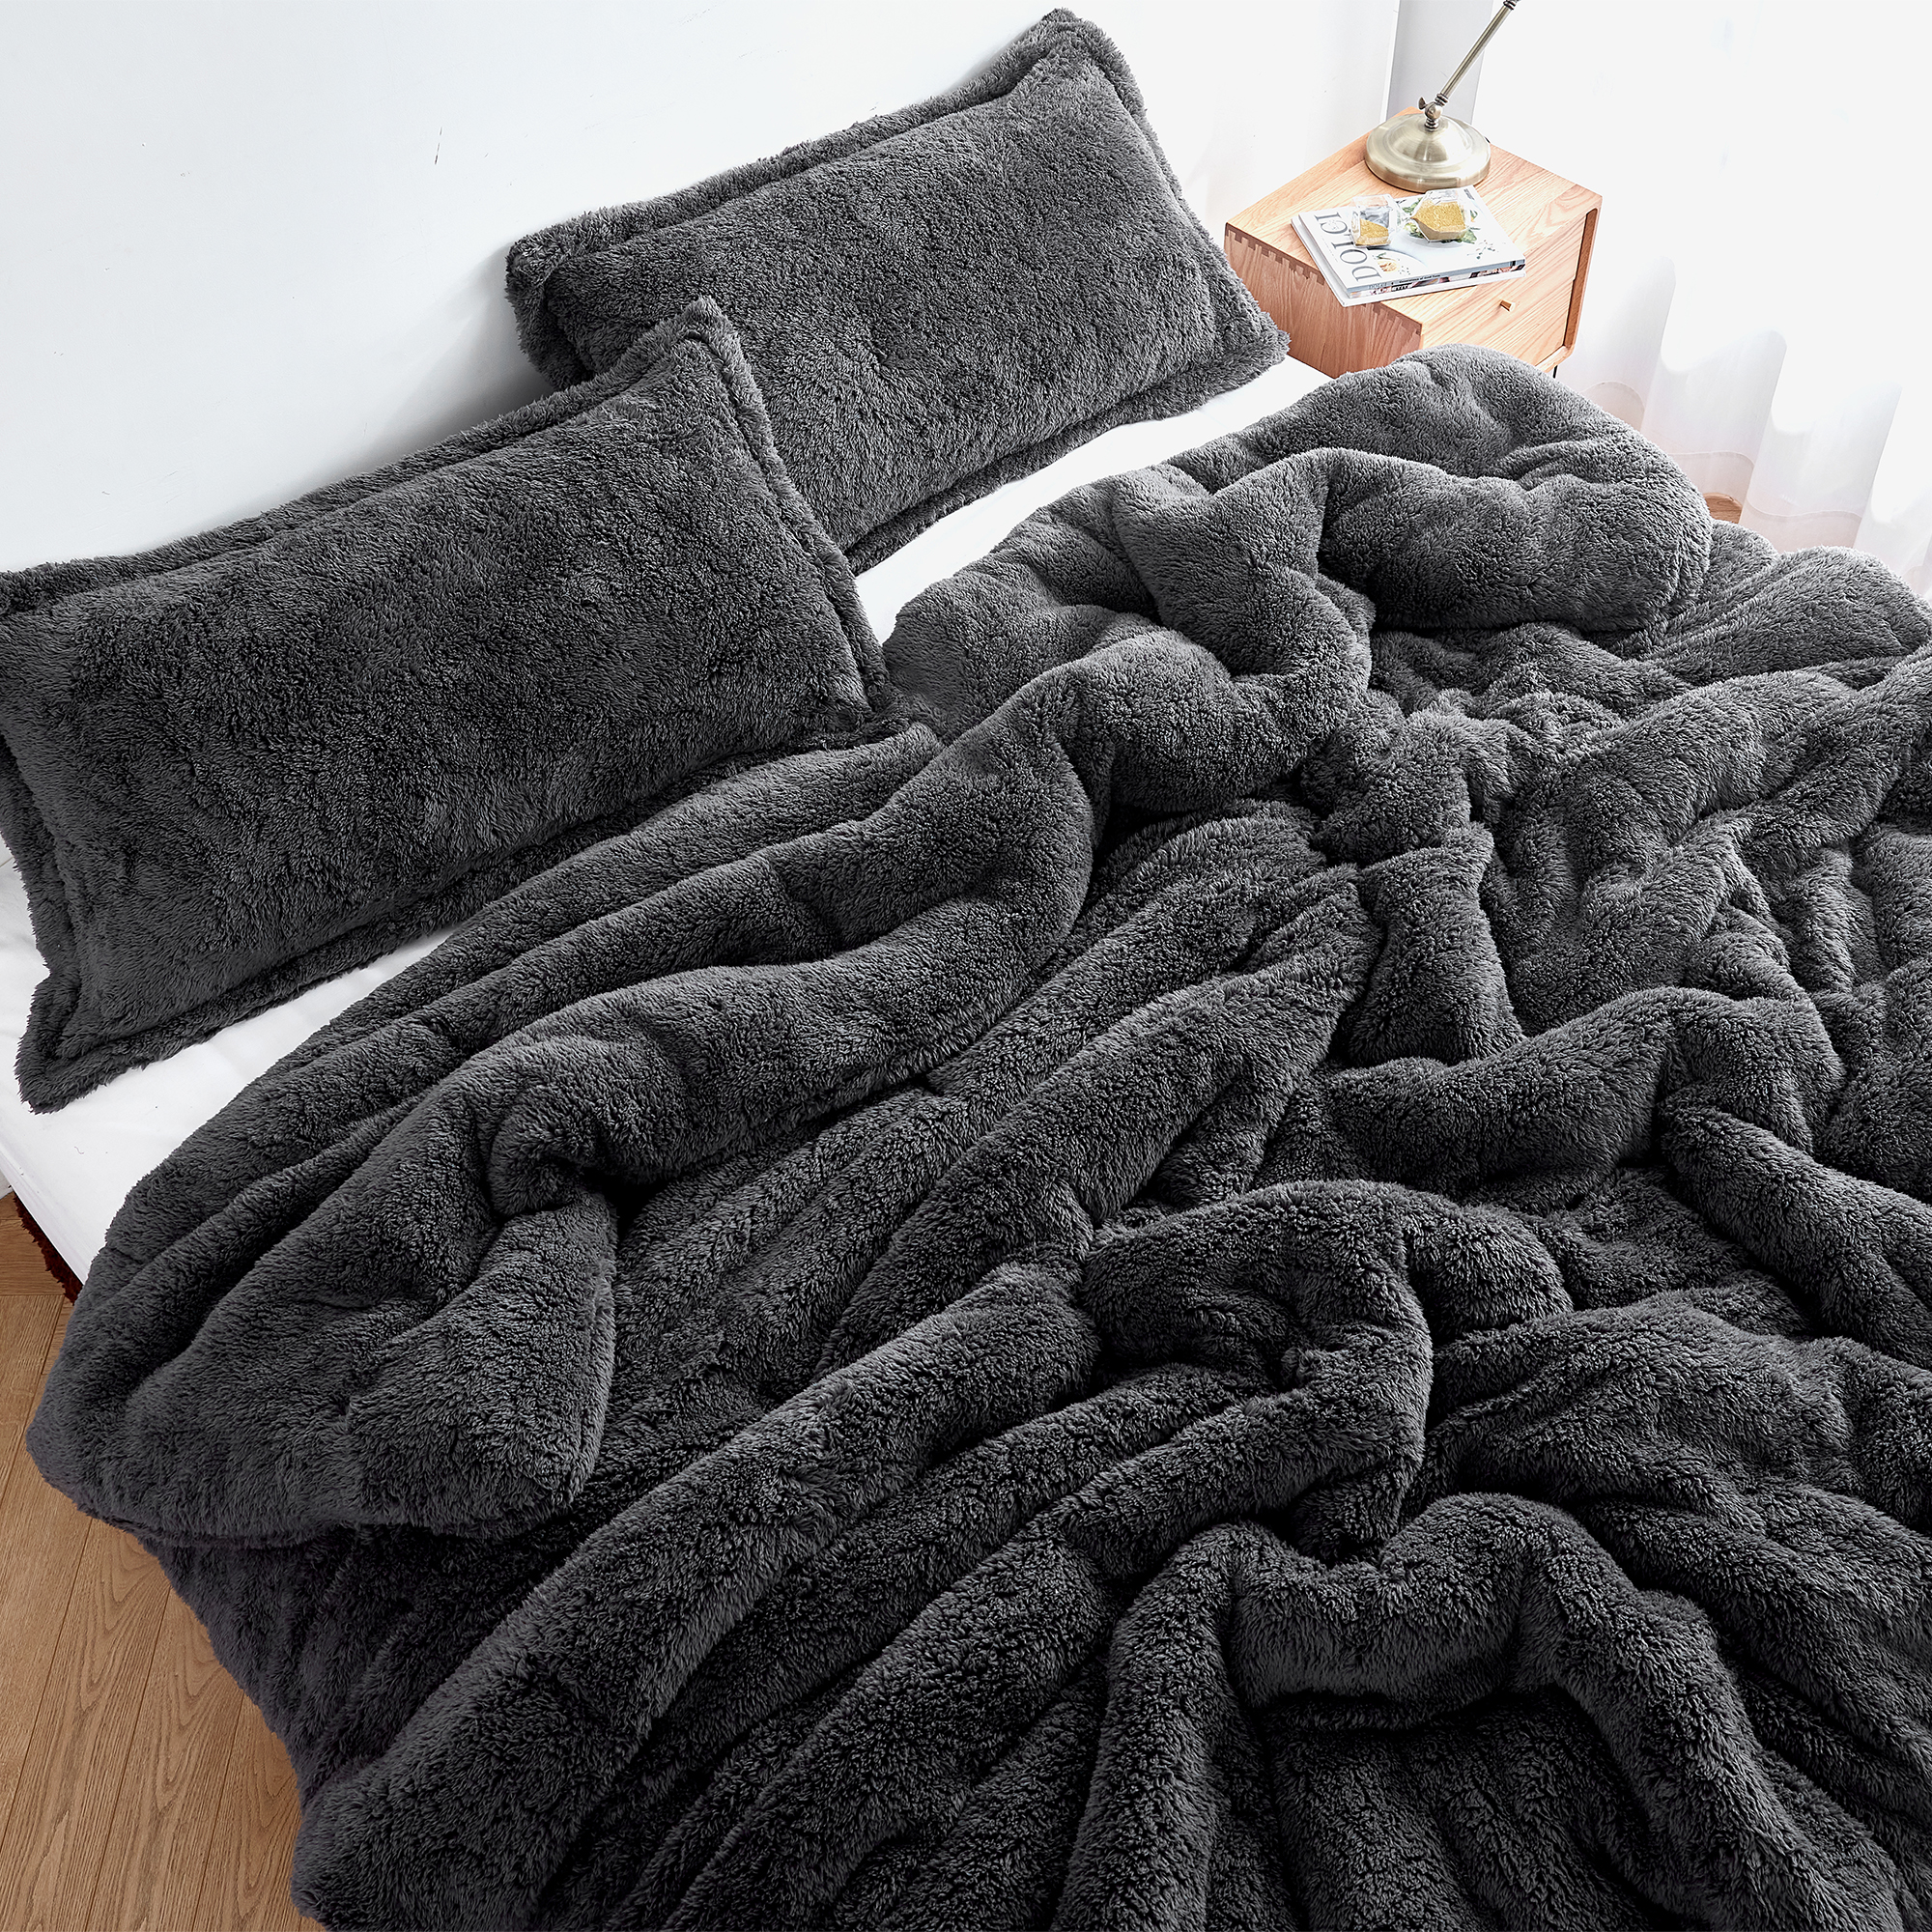 Coma Inducer® Queen Comforter  - Charcoal - Oversized Queen XL Bedding